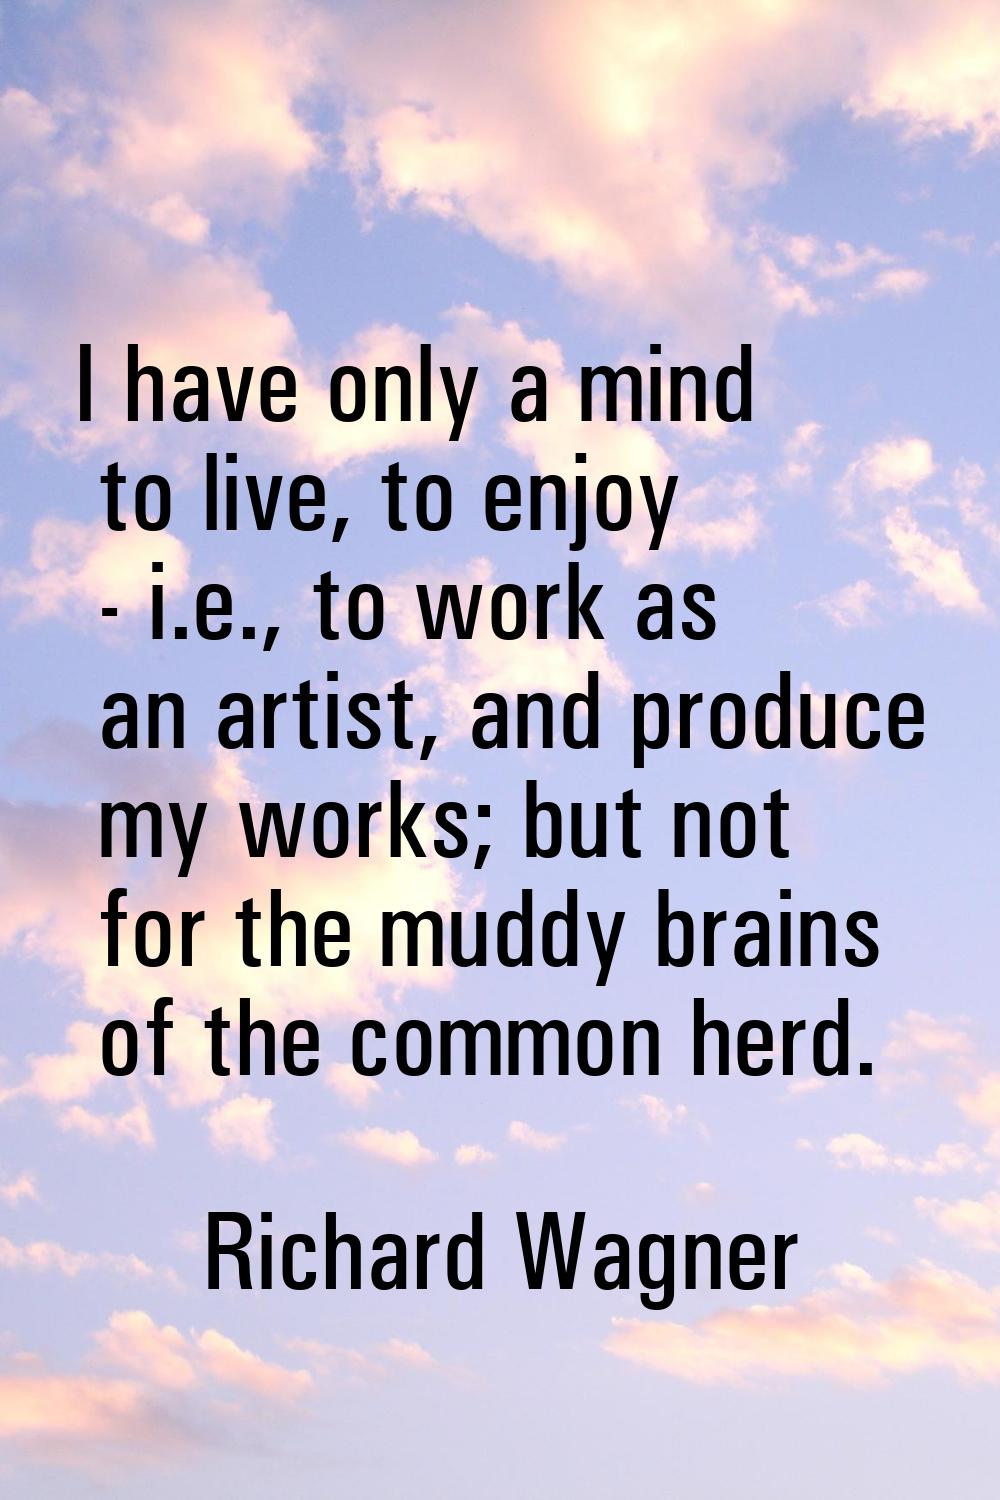 I have only a mind to live, to enjoy - i.e., to work as an artist, and produce my works; but not fo